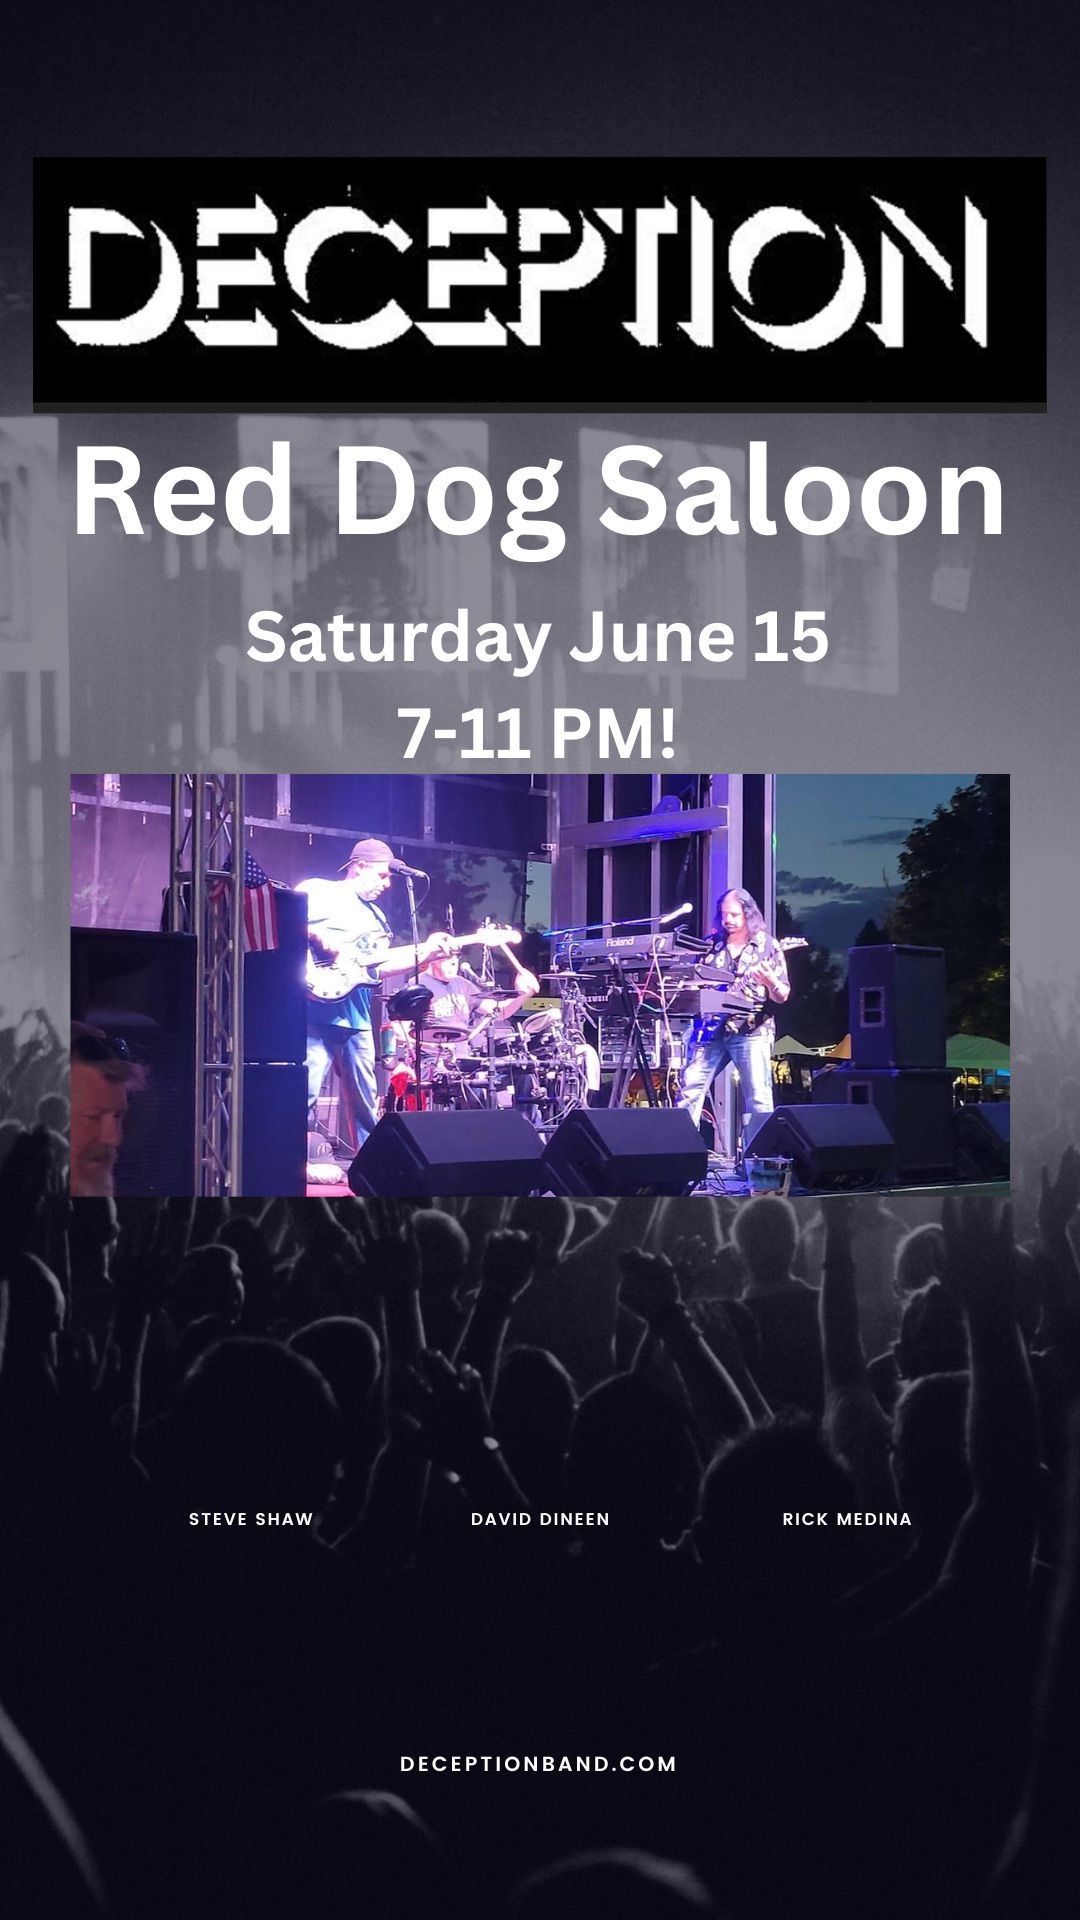 Rocking the Red Dog!